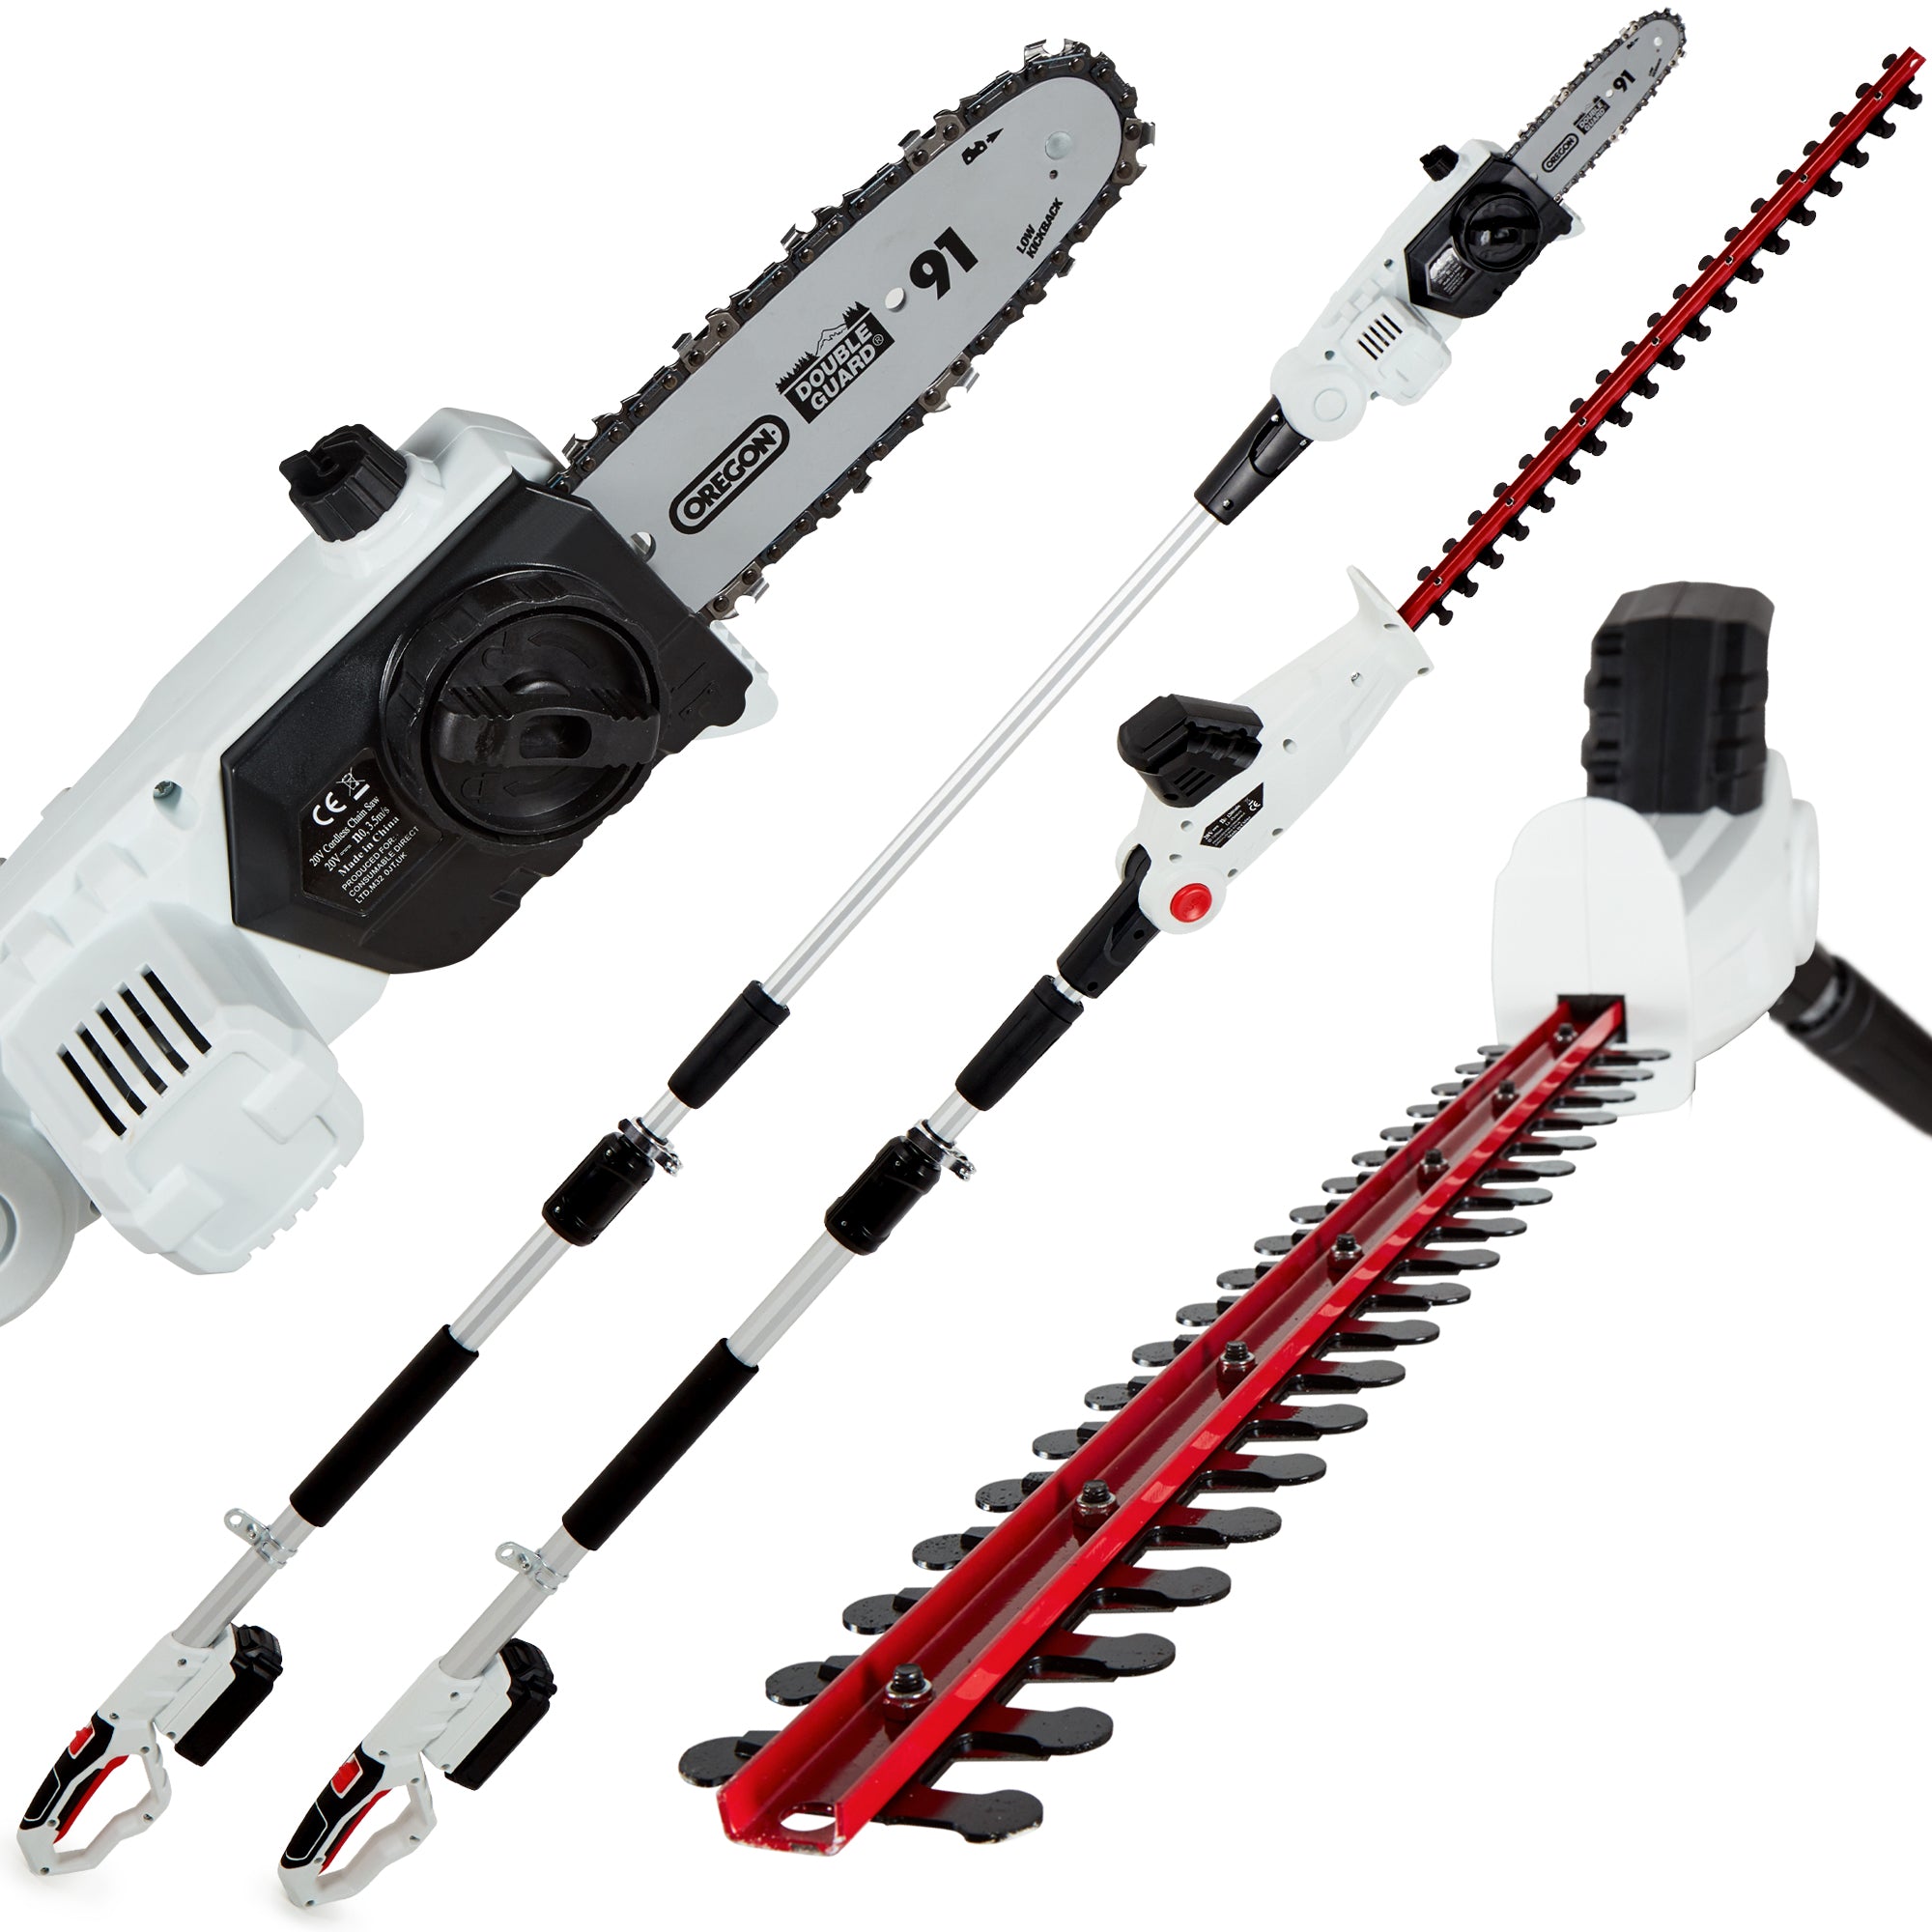 NETTA 2-in-1 20V Cordless Pole Telescopic Chainsaw and Hedge Trimmer